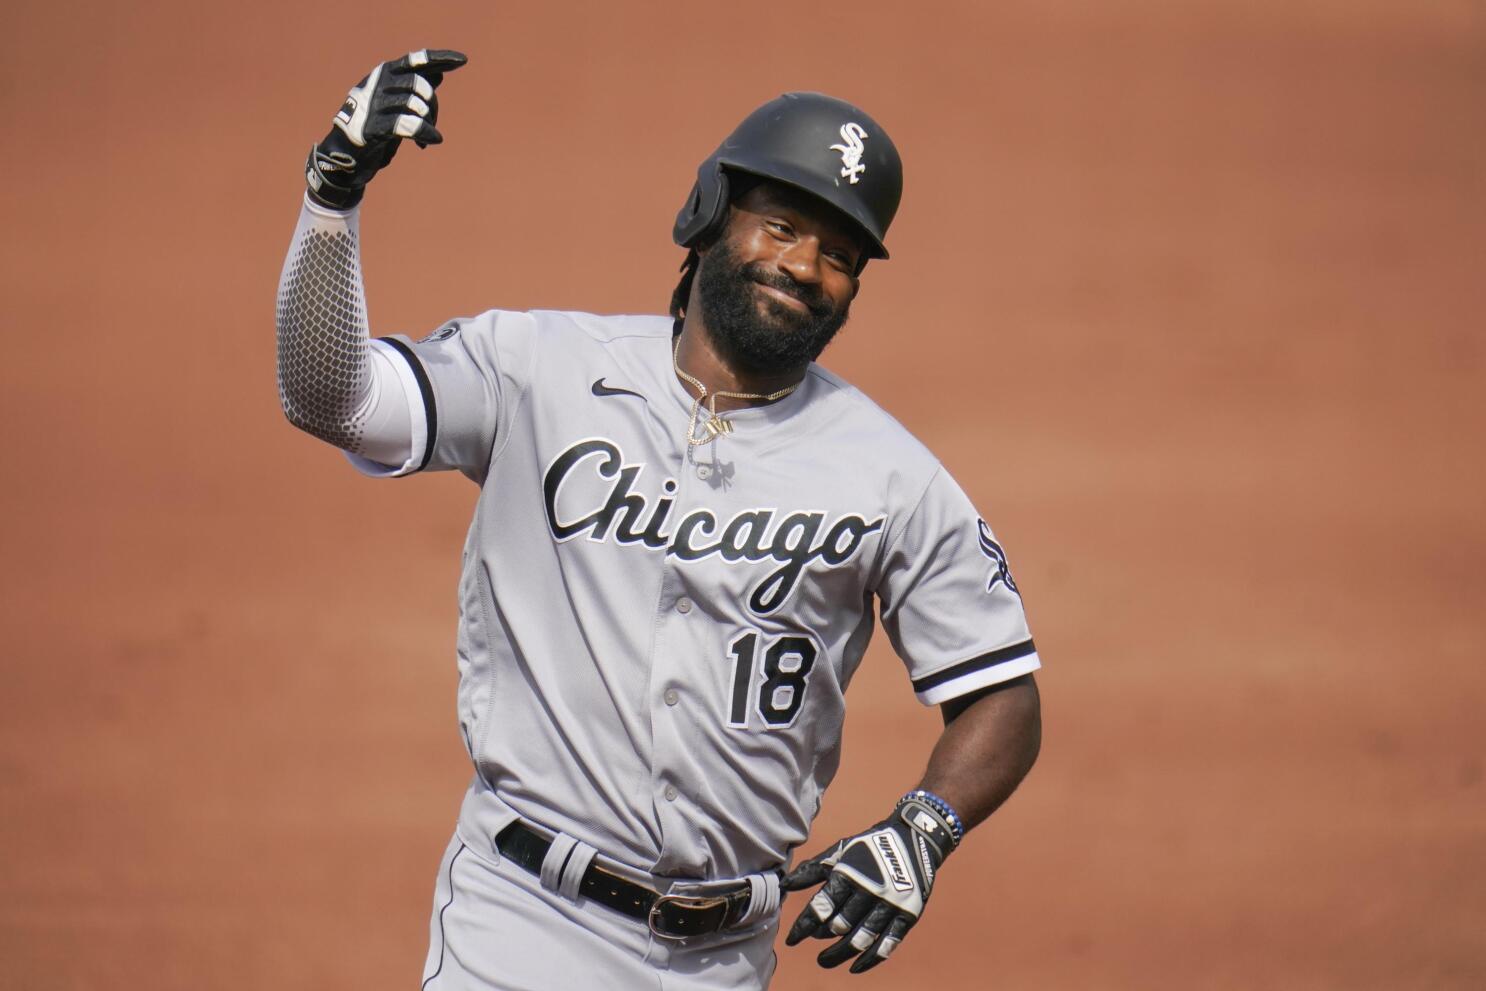 Chicago White Sox's Mercedes named AL Player of the Week